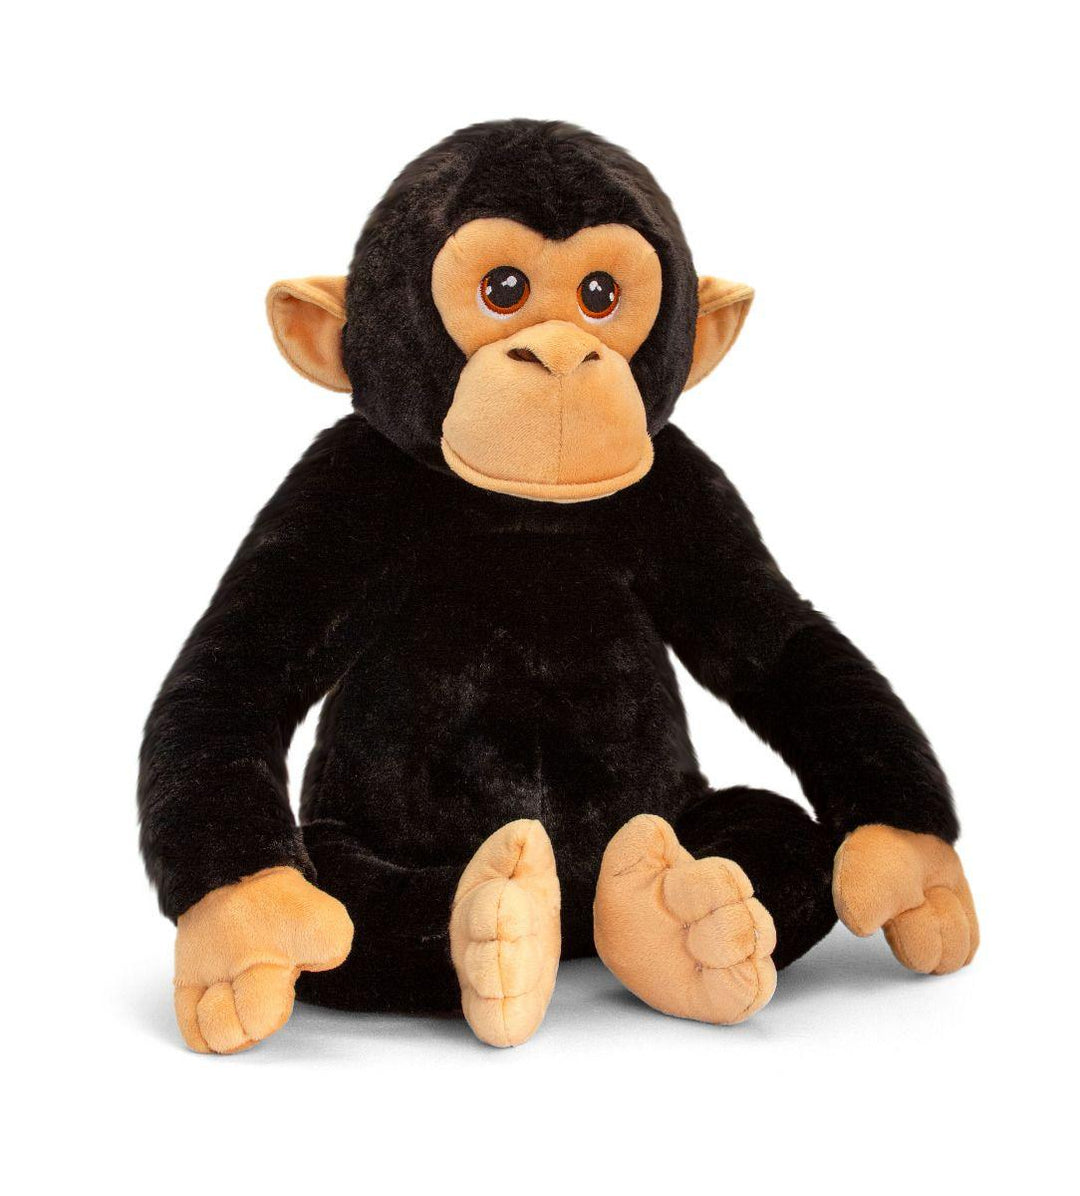 William the Chimpanzee - Nana's Weighted Blankets